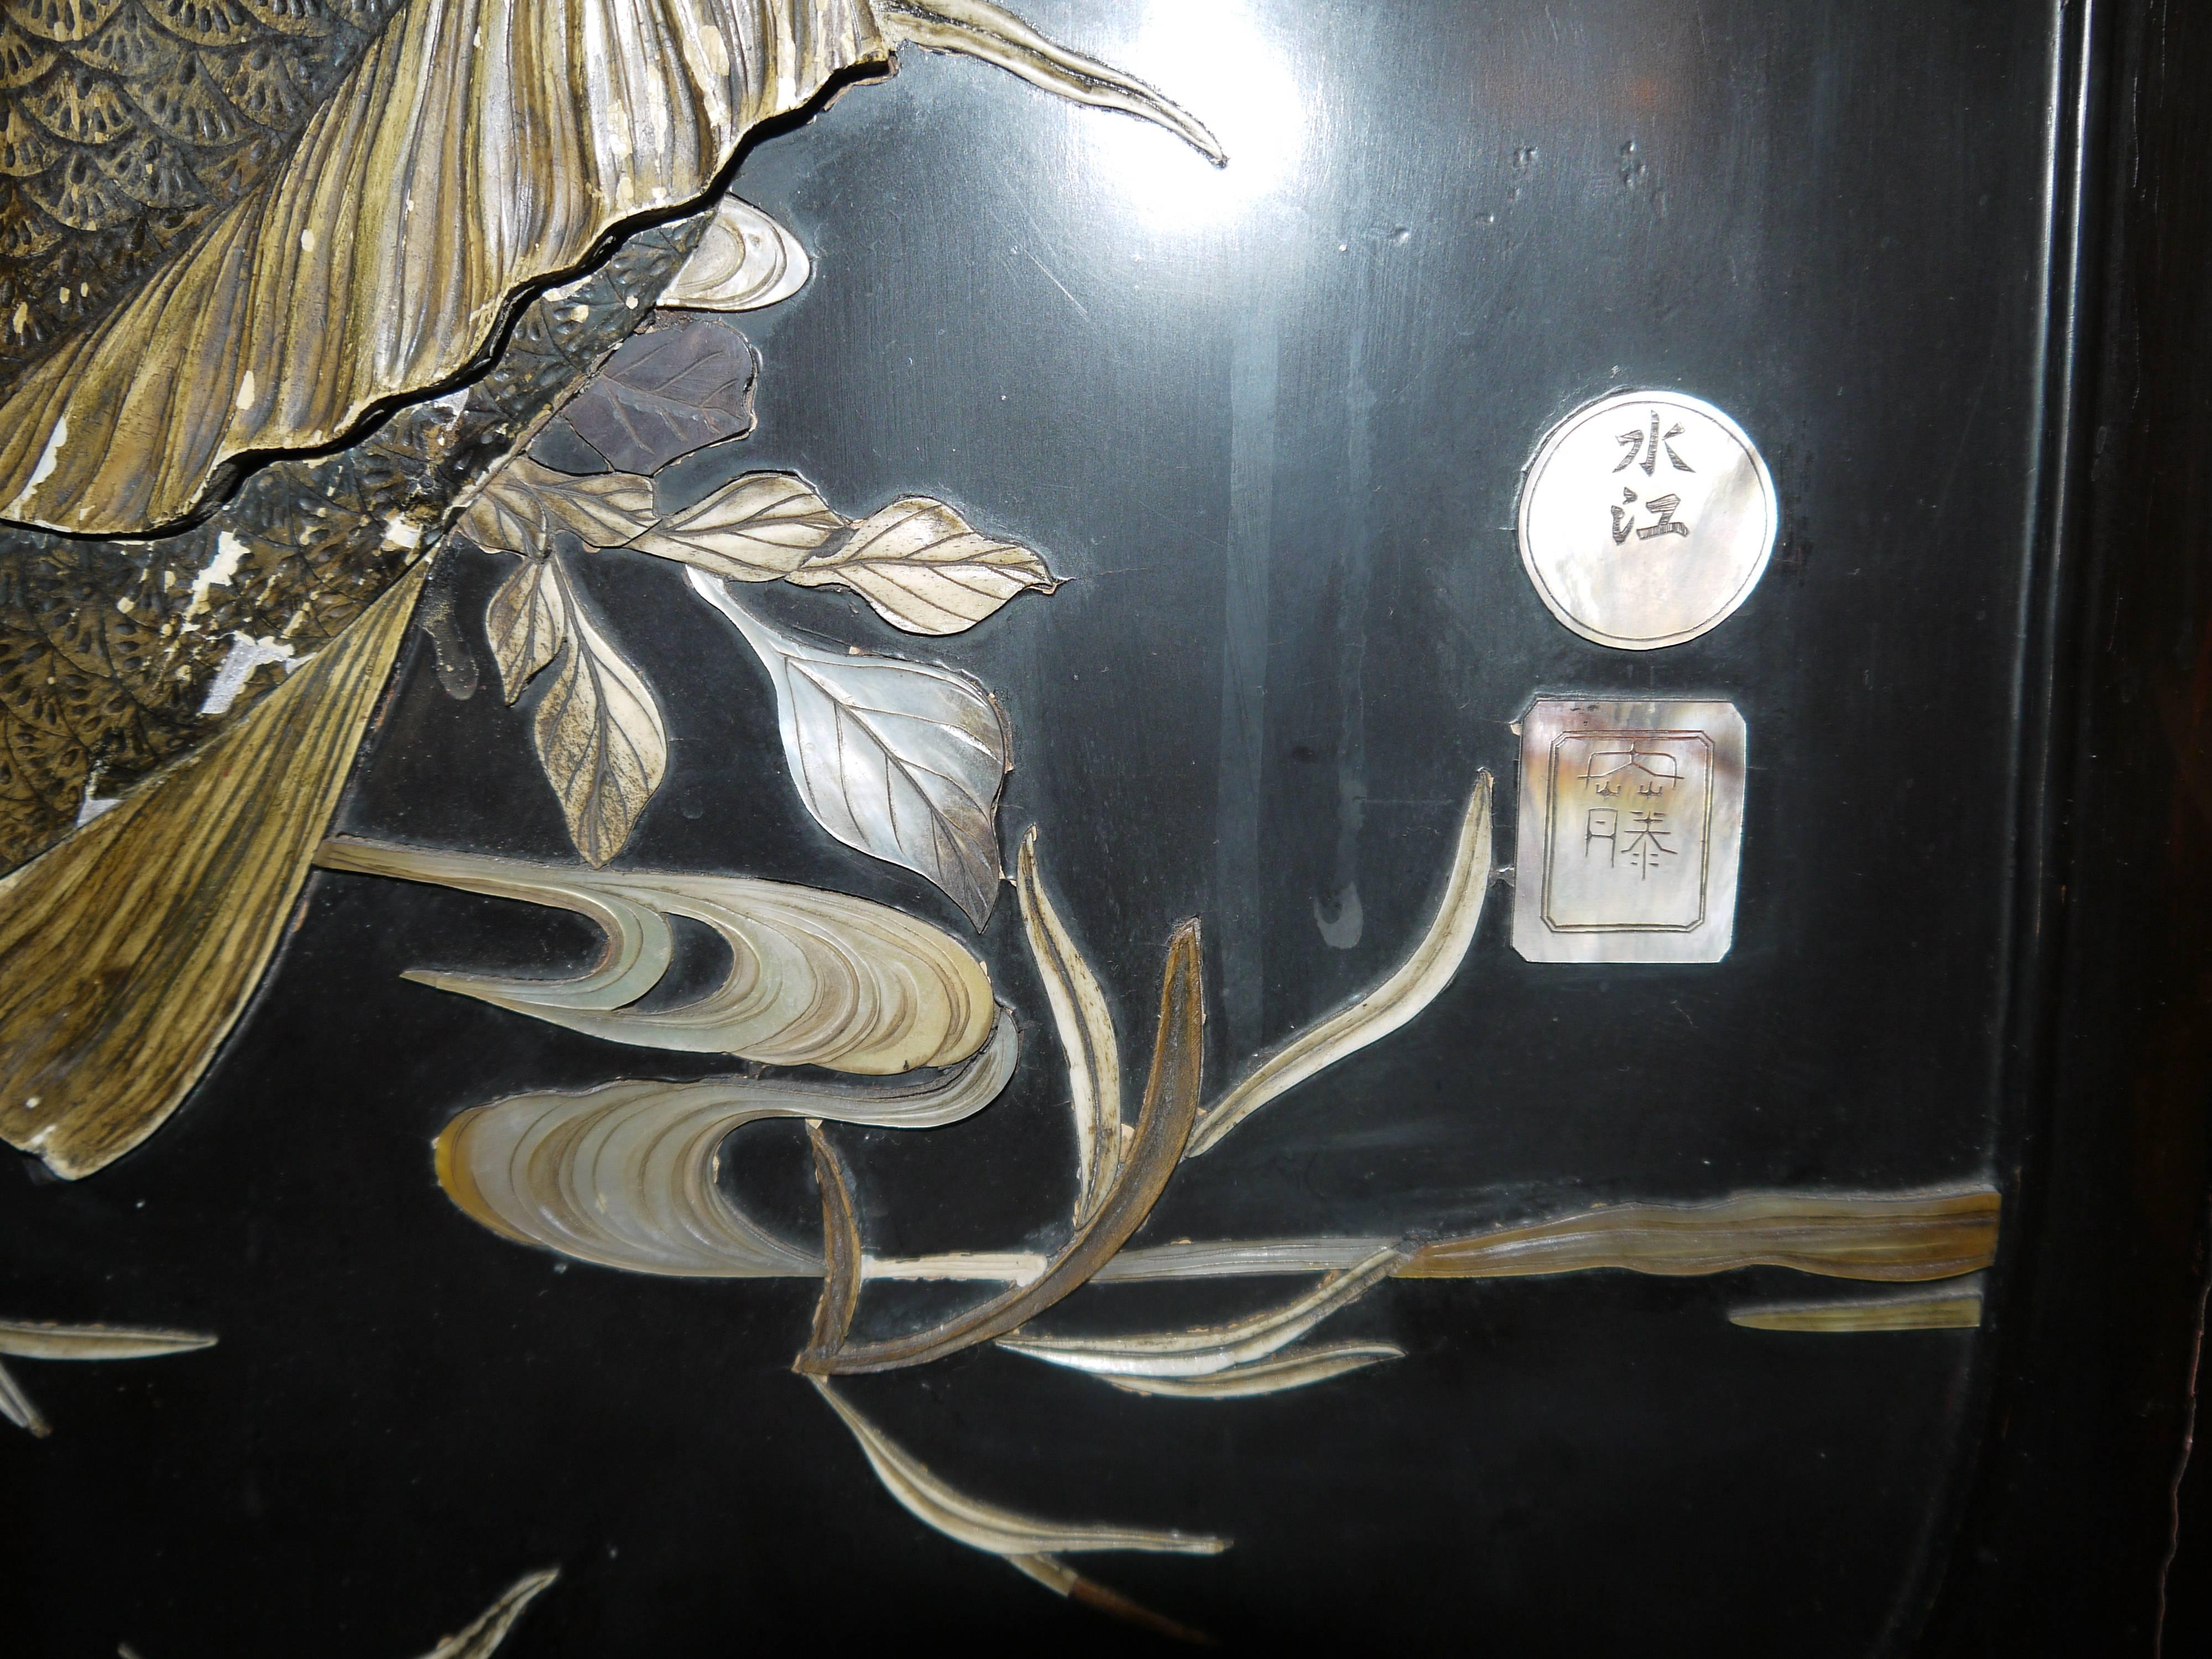 A large panel, ready to hang on the wall, with raised design of carp, water and plants. The carving is highly detailed.